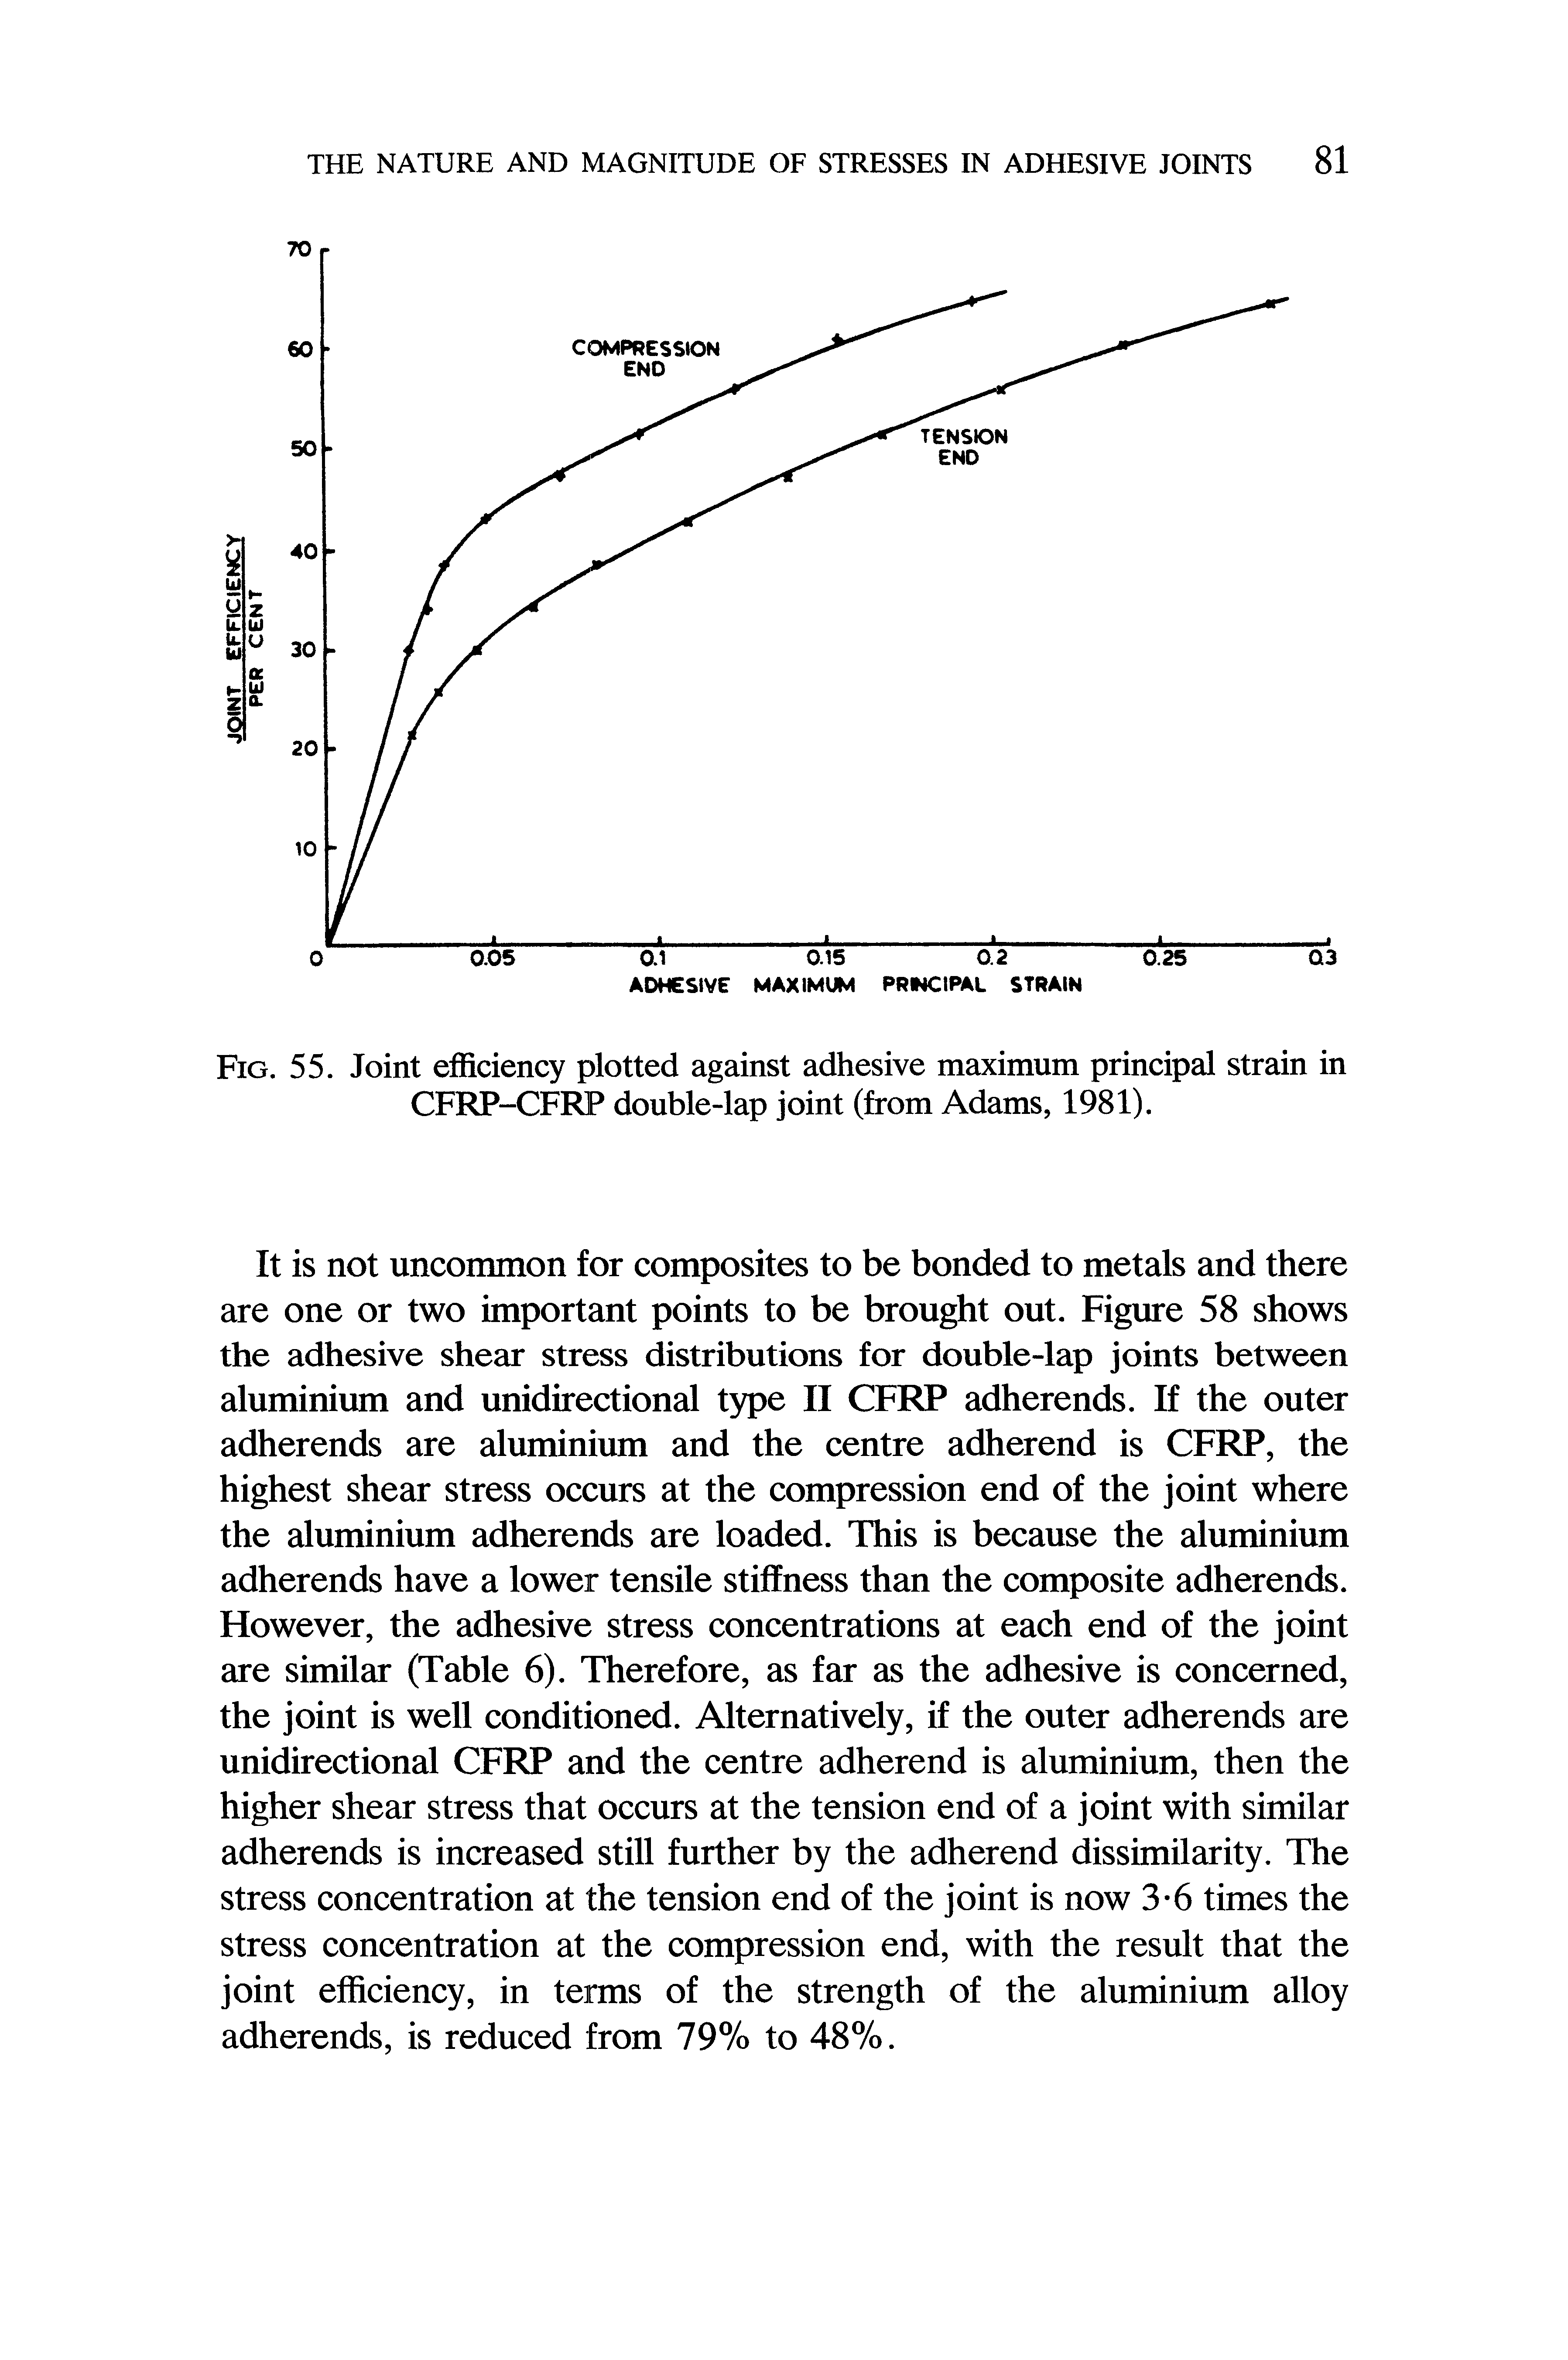 Fig. 55. Joint efficiency plotted against adhesive maximum principal strain in CFRP-CFRP double-lap joint (from Adams, 1981).